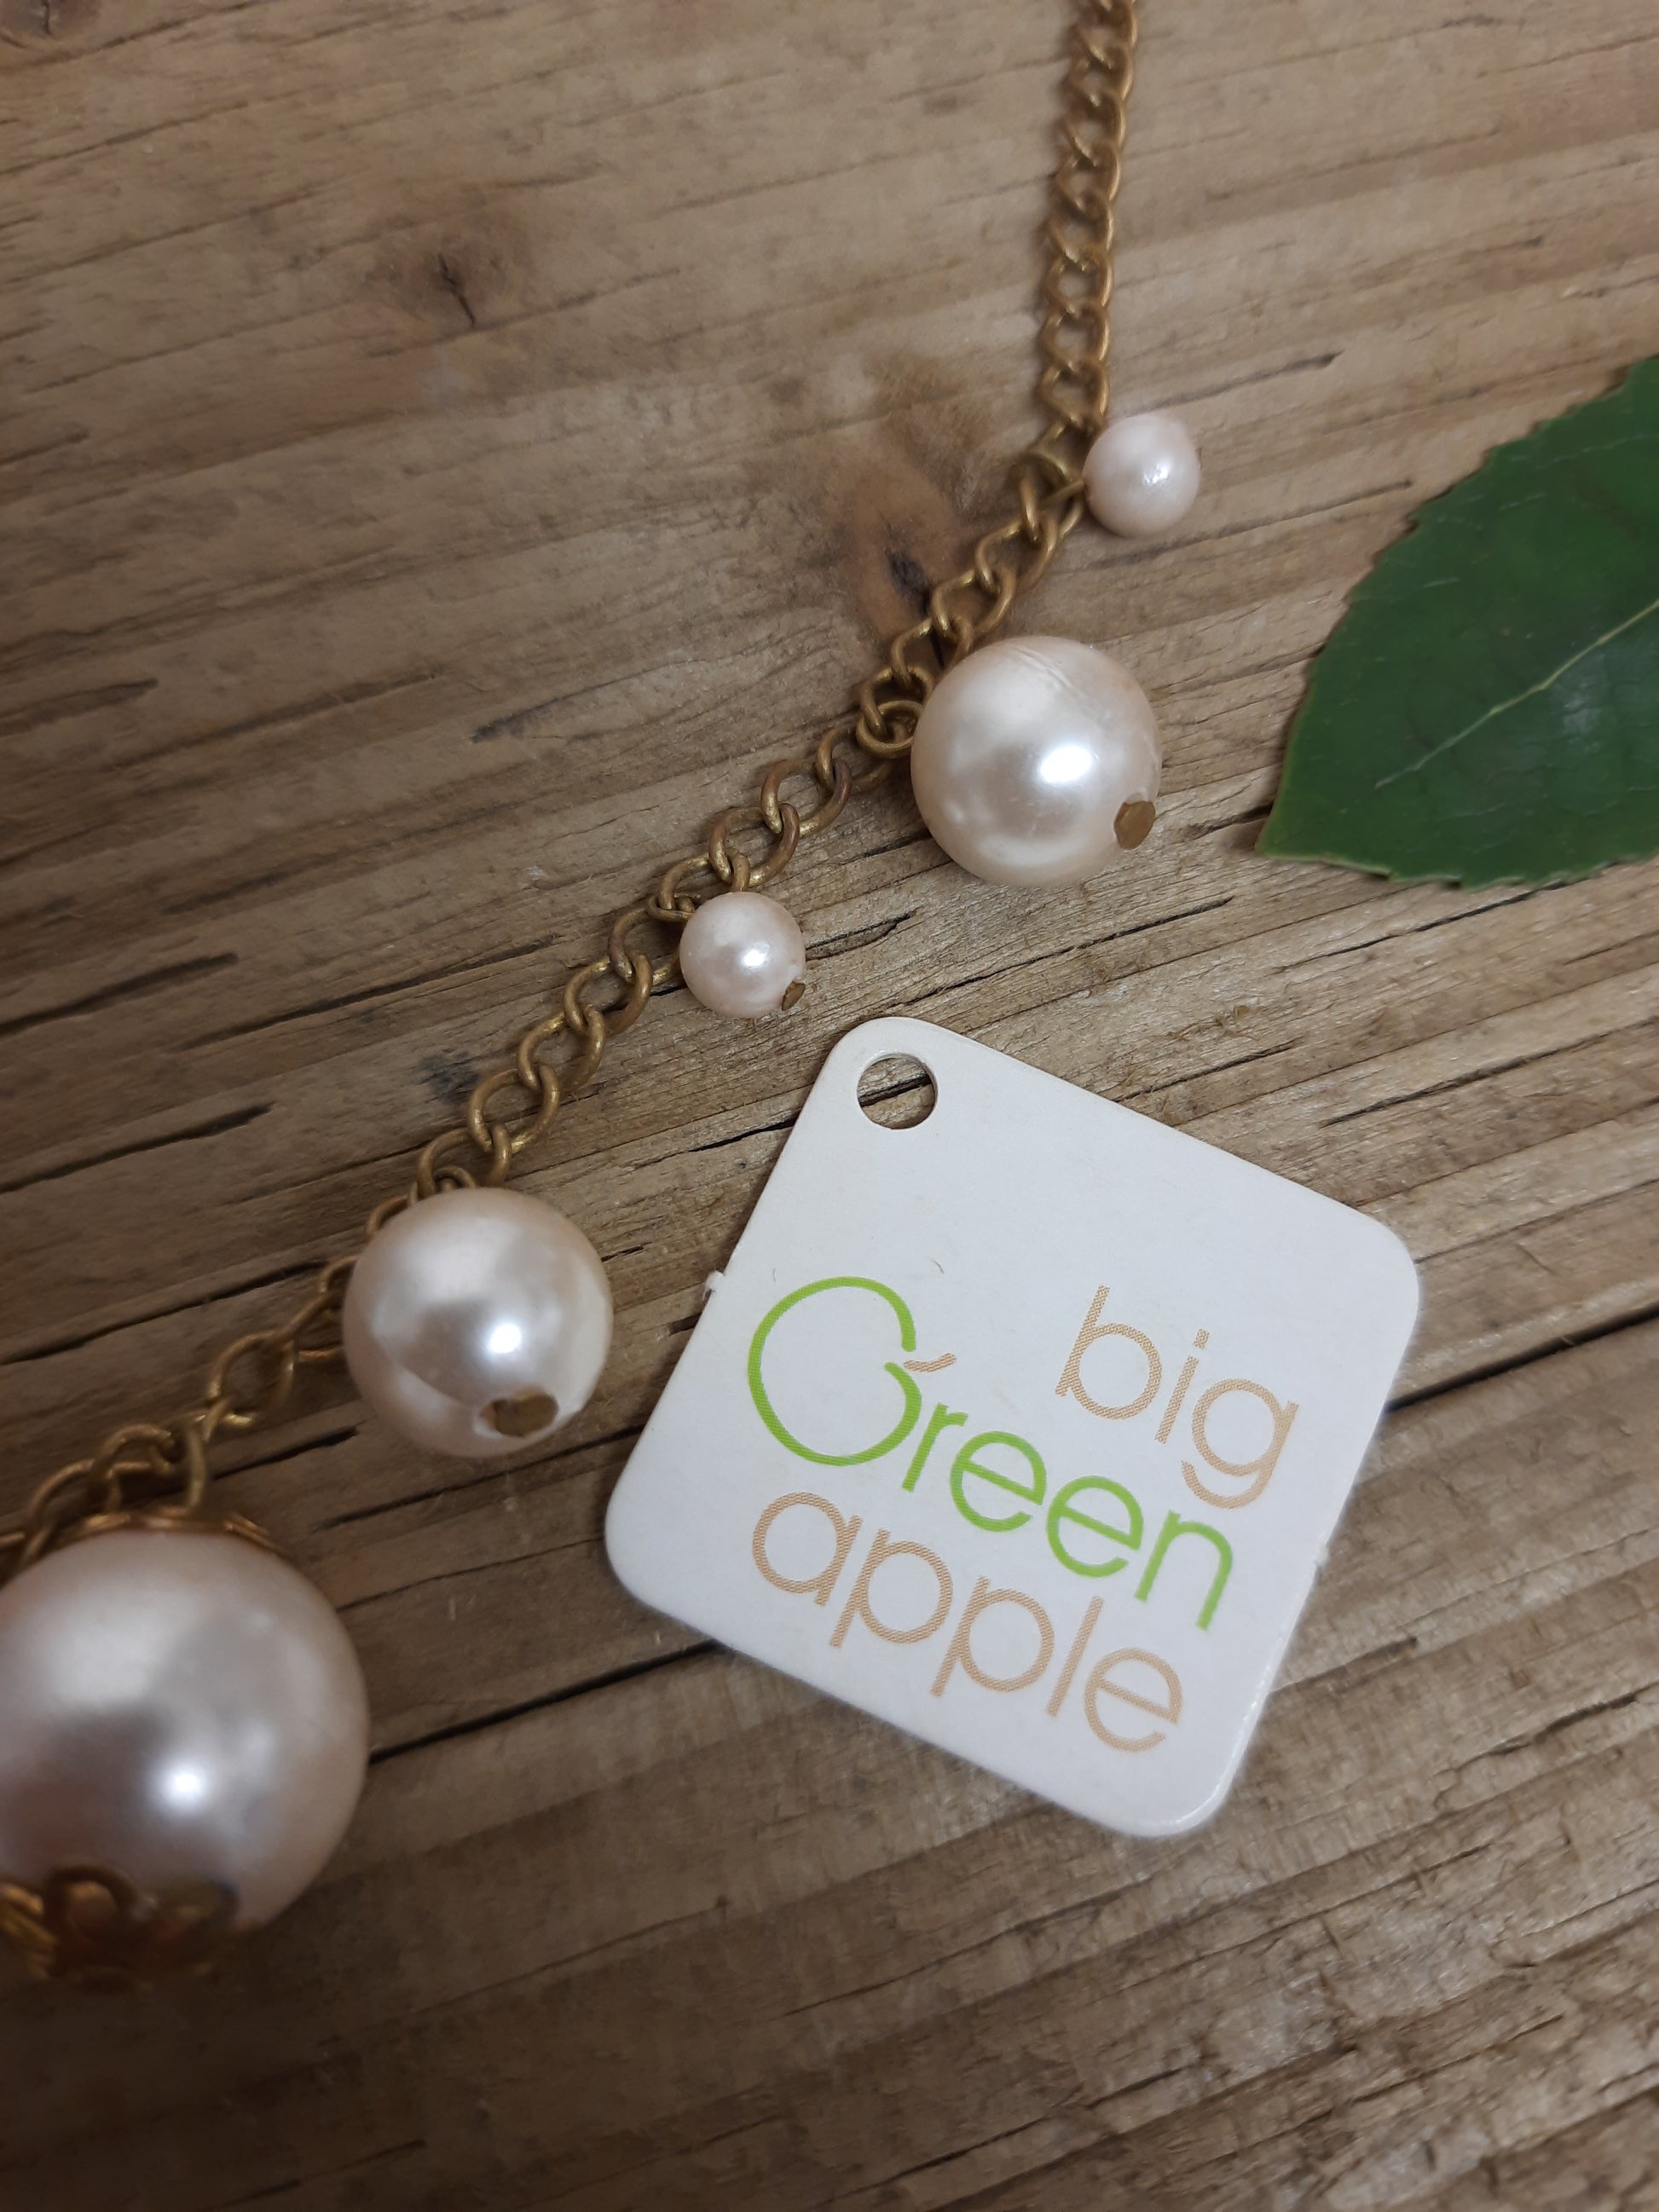 Necklaces, Sustainable Brands UK, Gift Ideas For Women, Jewellery Fair, BIG GREEN APPLE